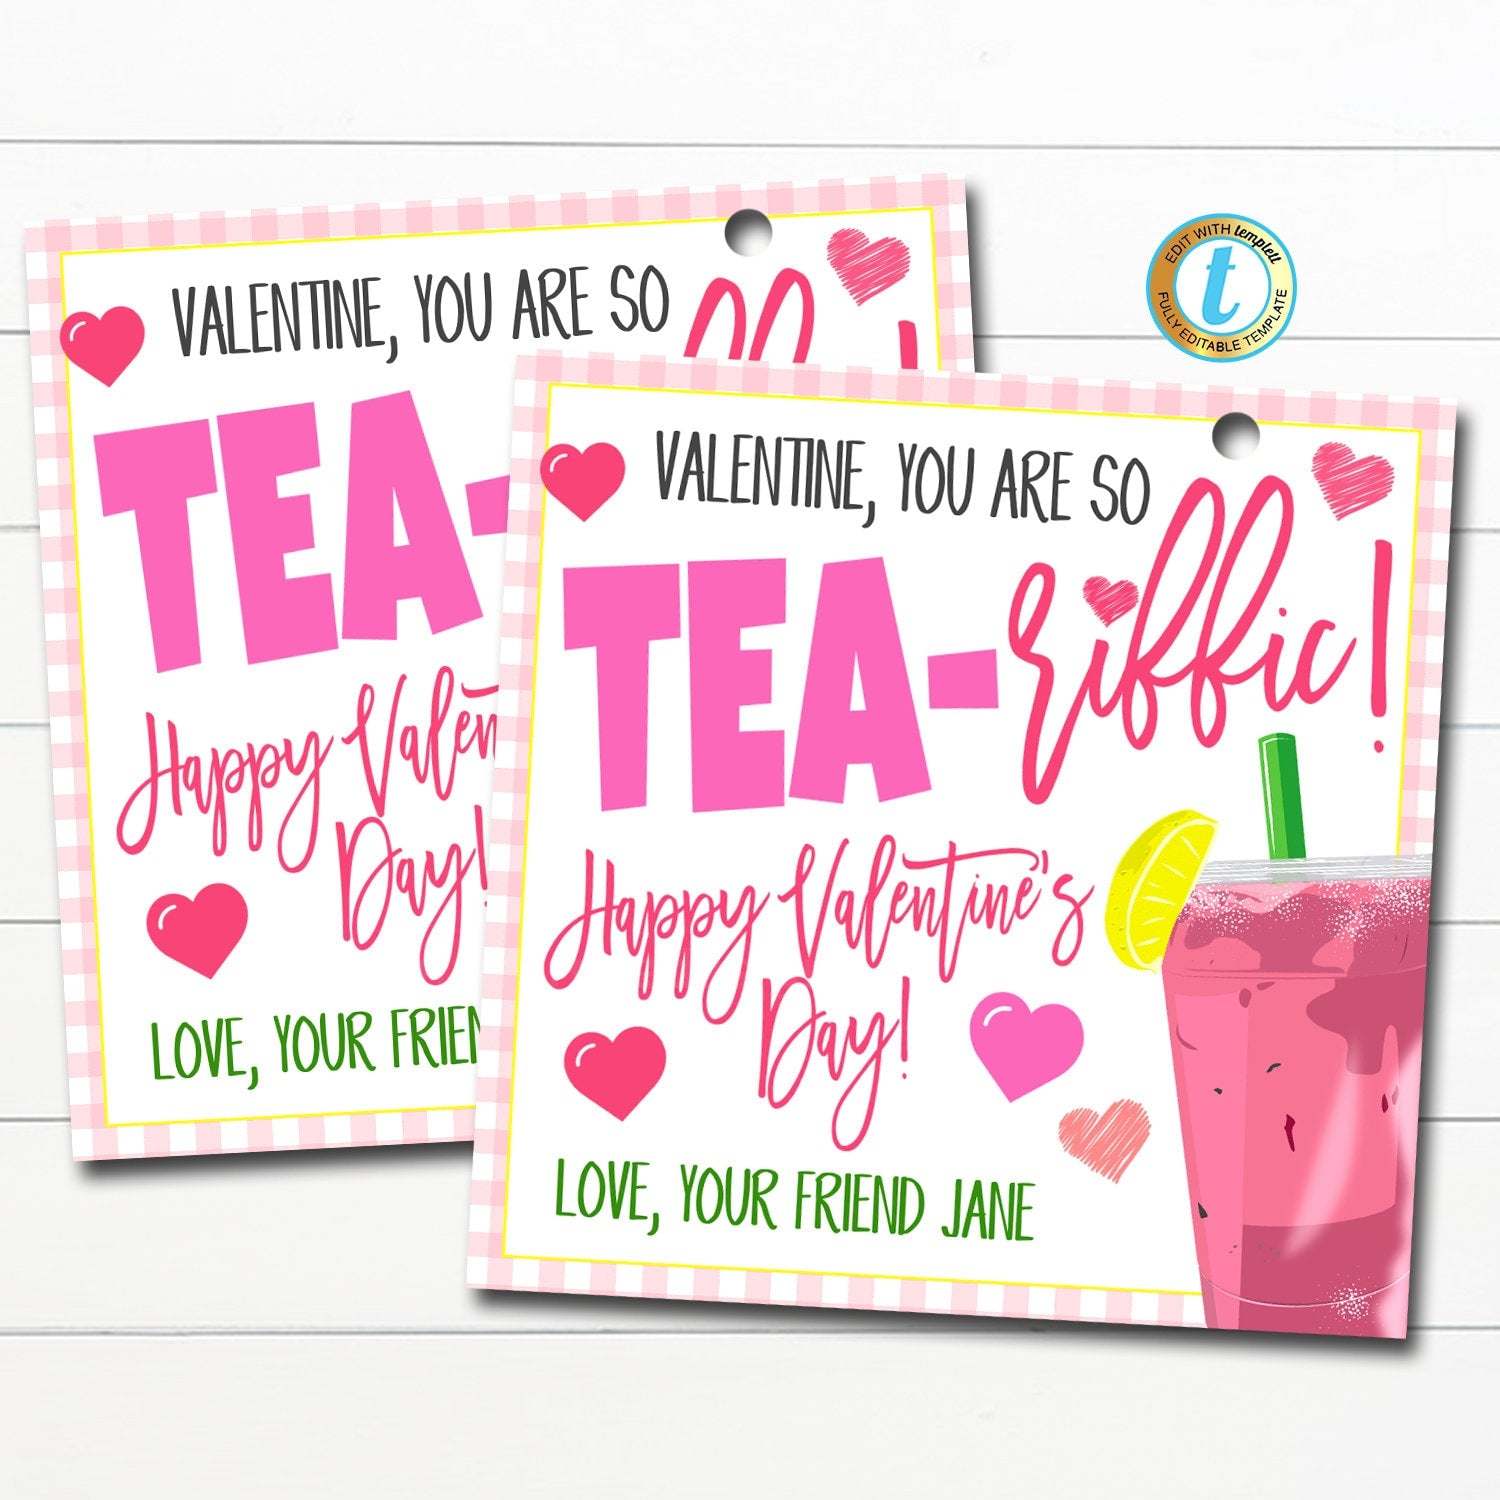 Valentine Iced Tea Gift Tags  You're Tea-riffic! — TidyLady